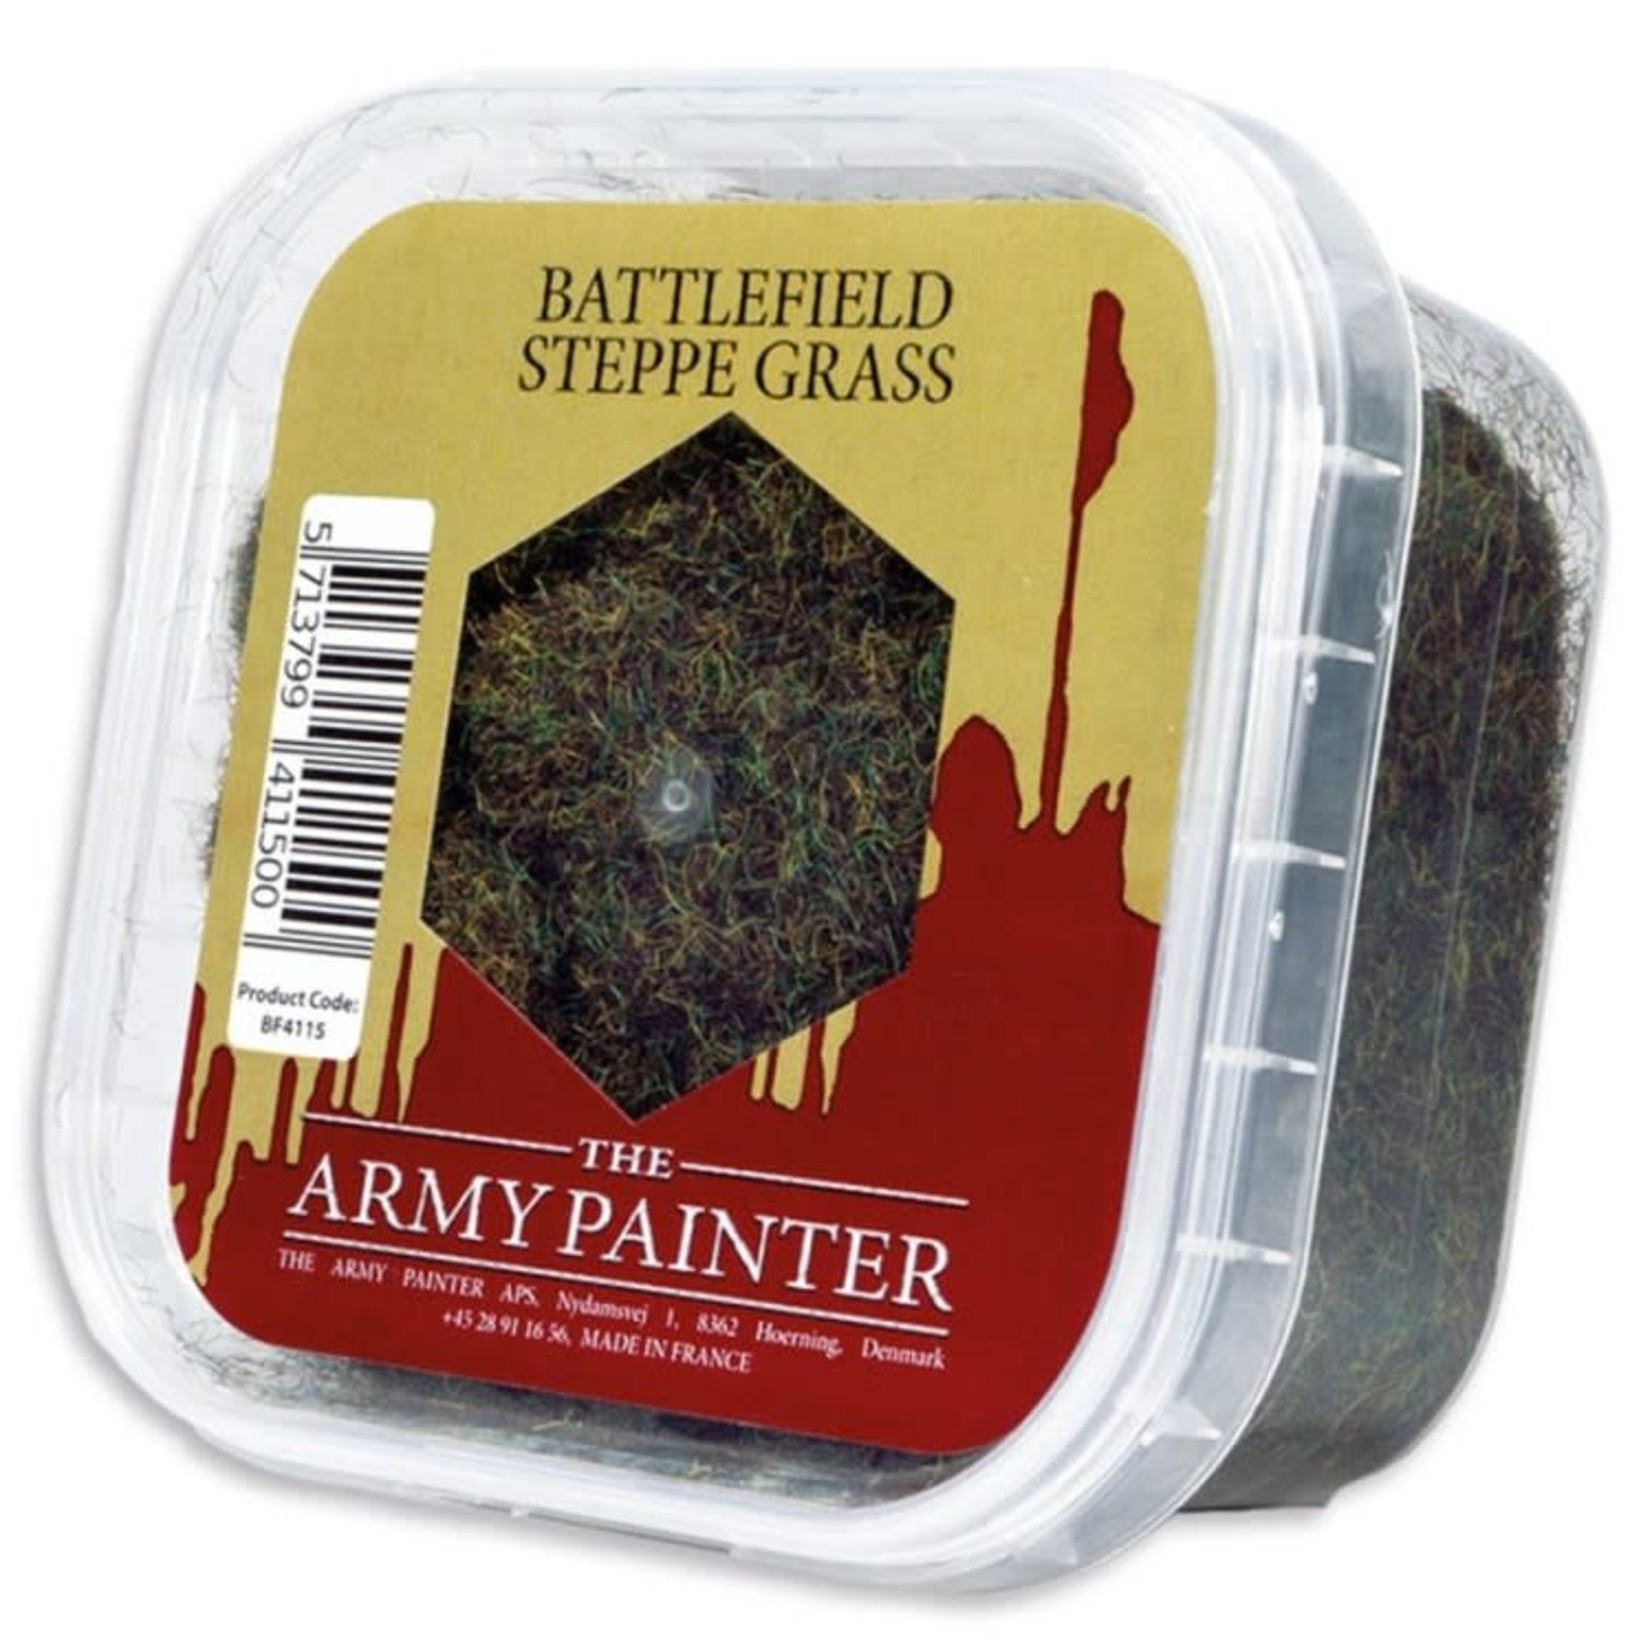 The Army Painter The Army Painter: Steppe Grass